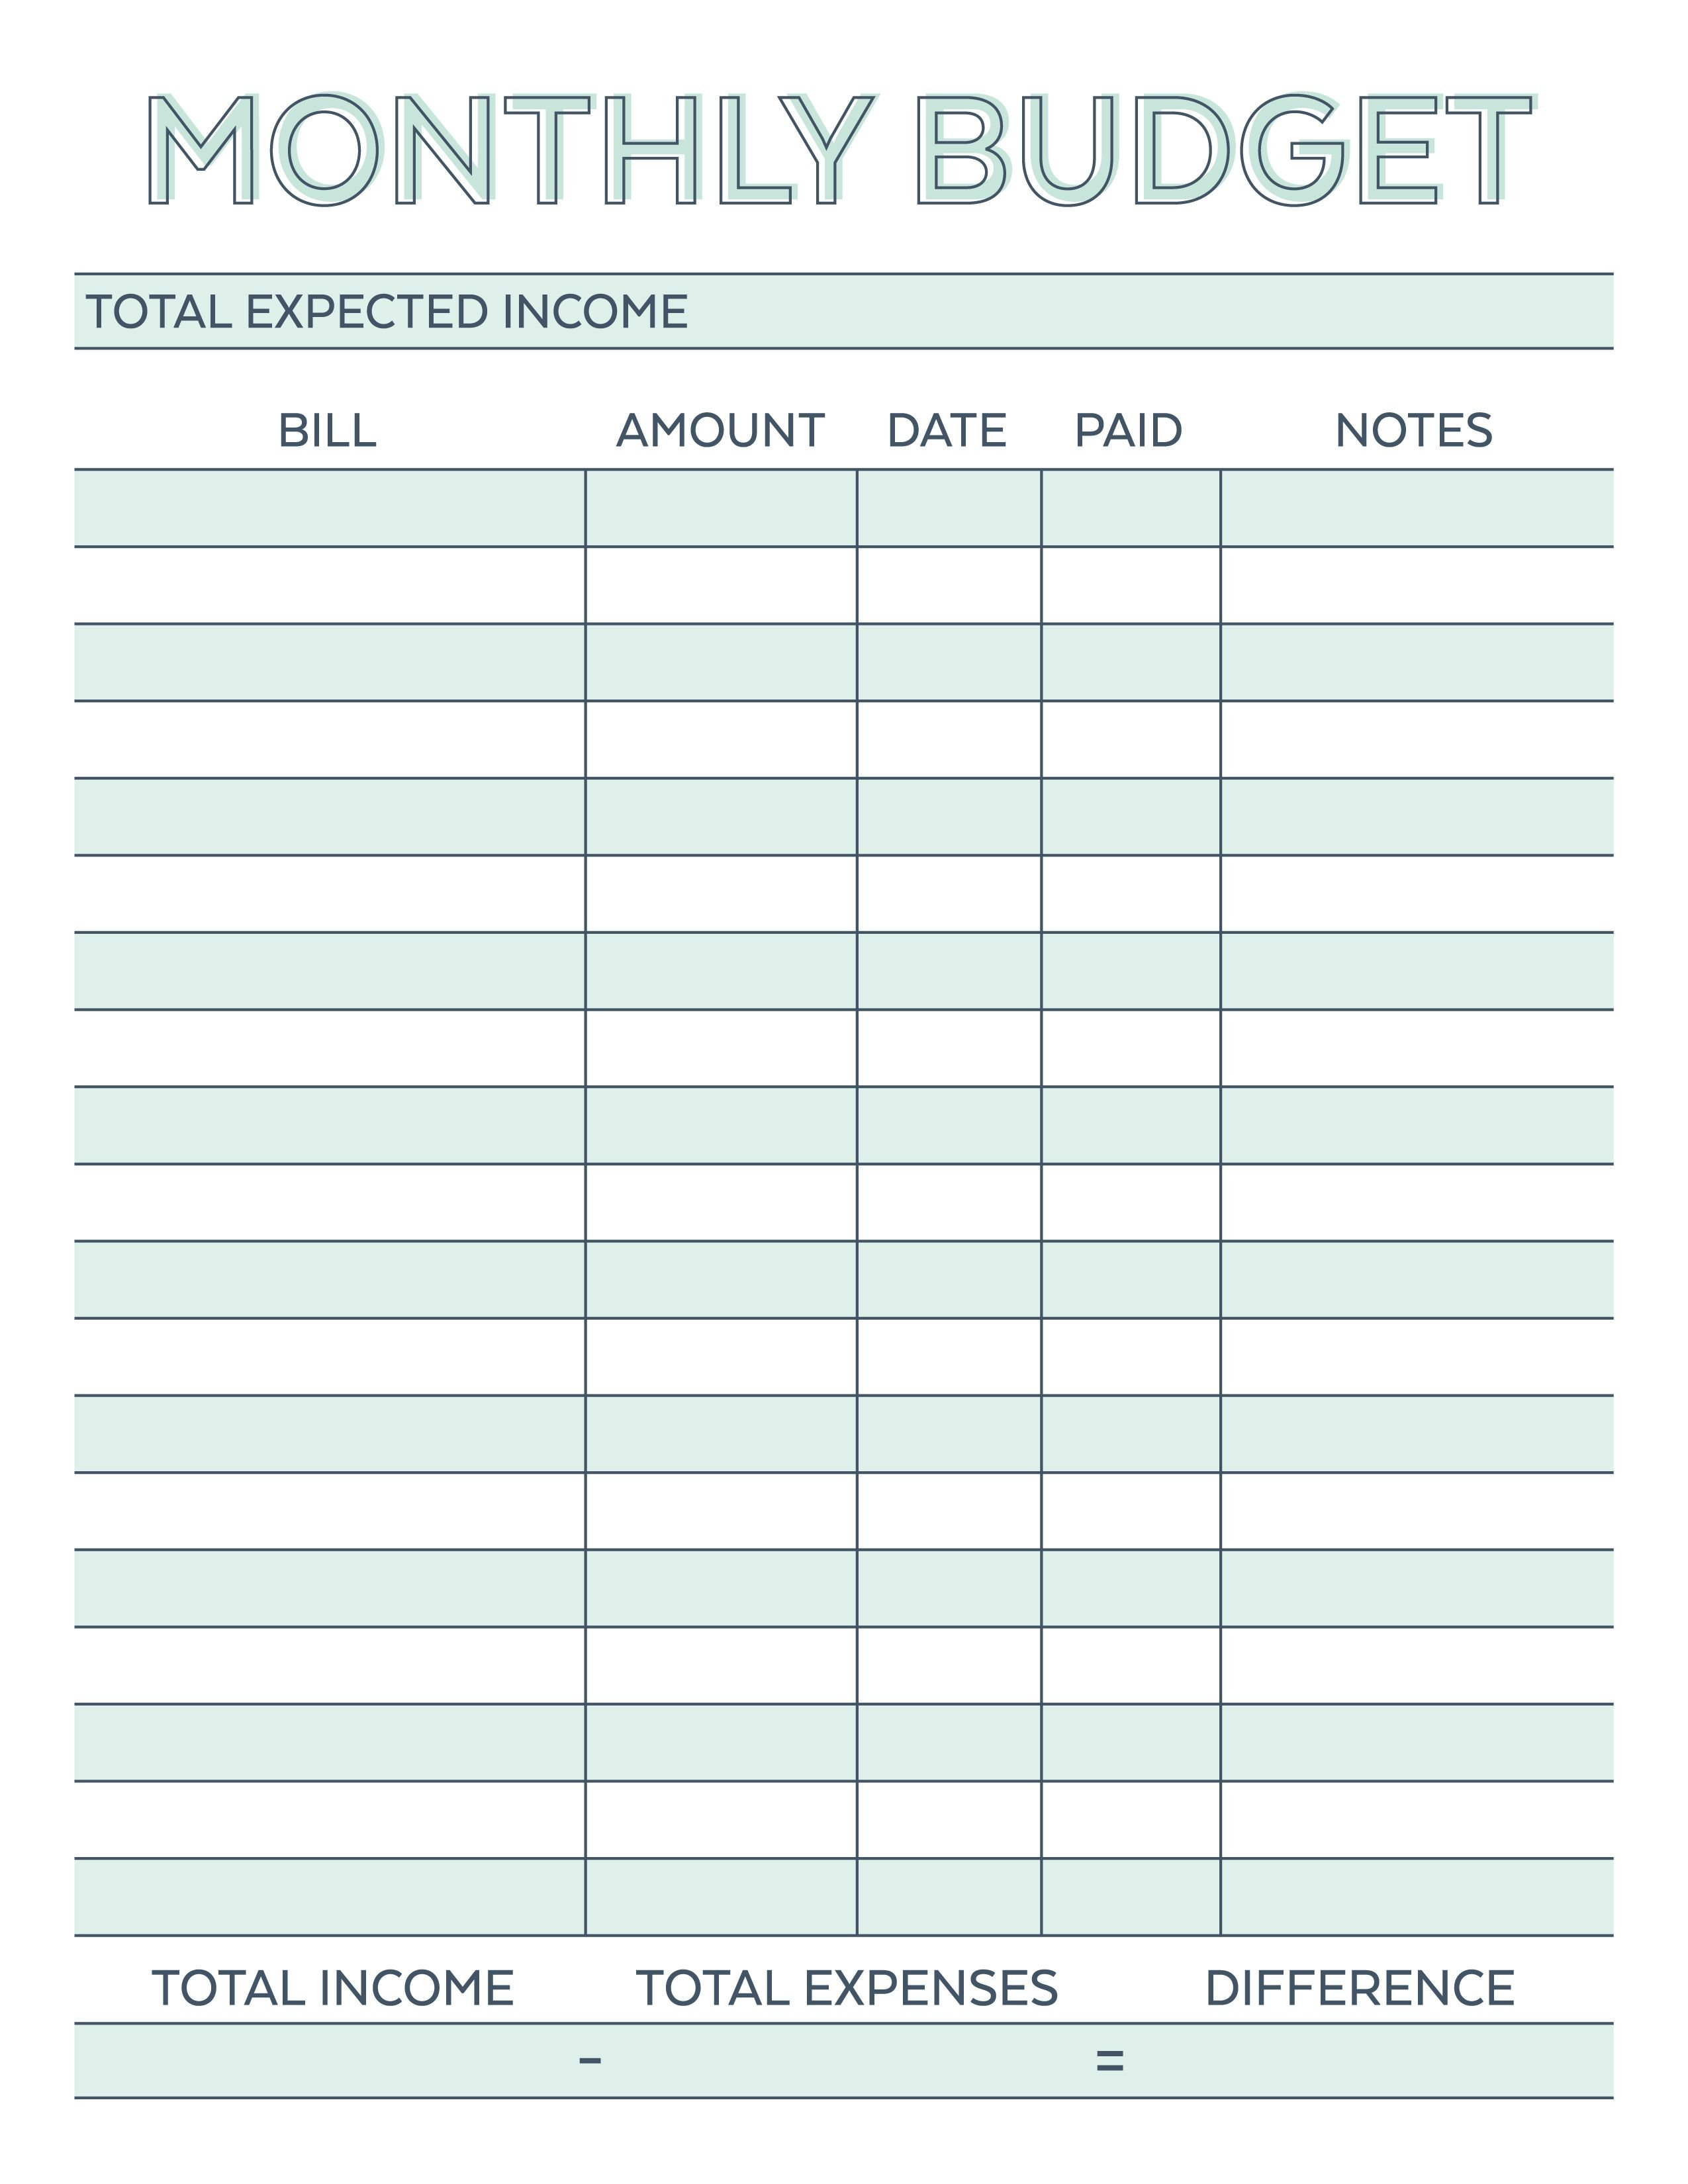 005 Month Budget Template Plan Fascinating Templates Monthly Pdf Within Monthly Budget Worksheet Pdf